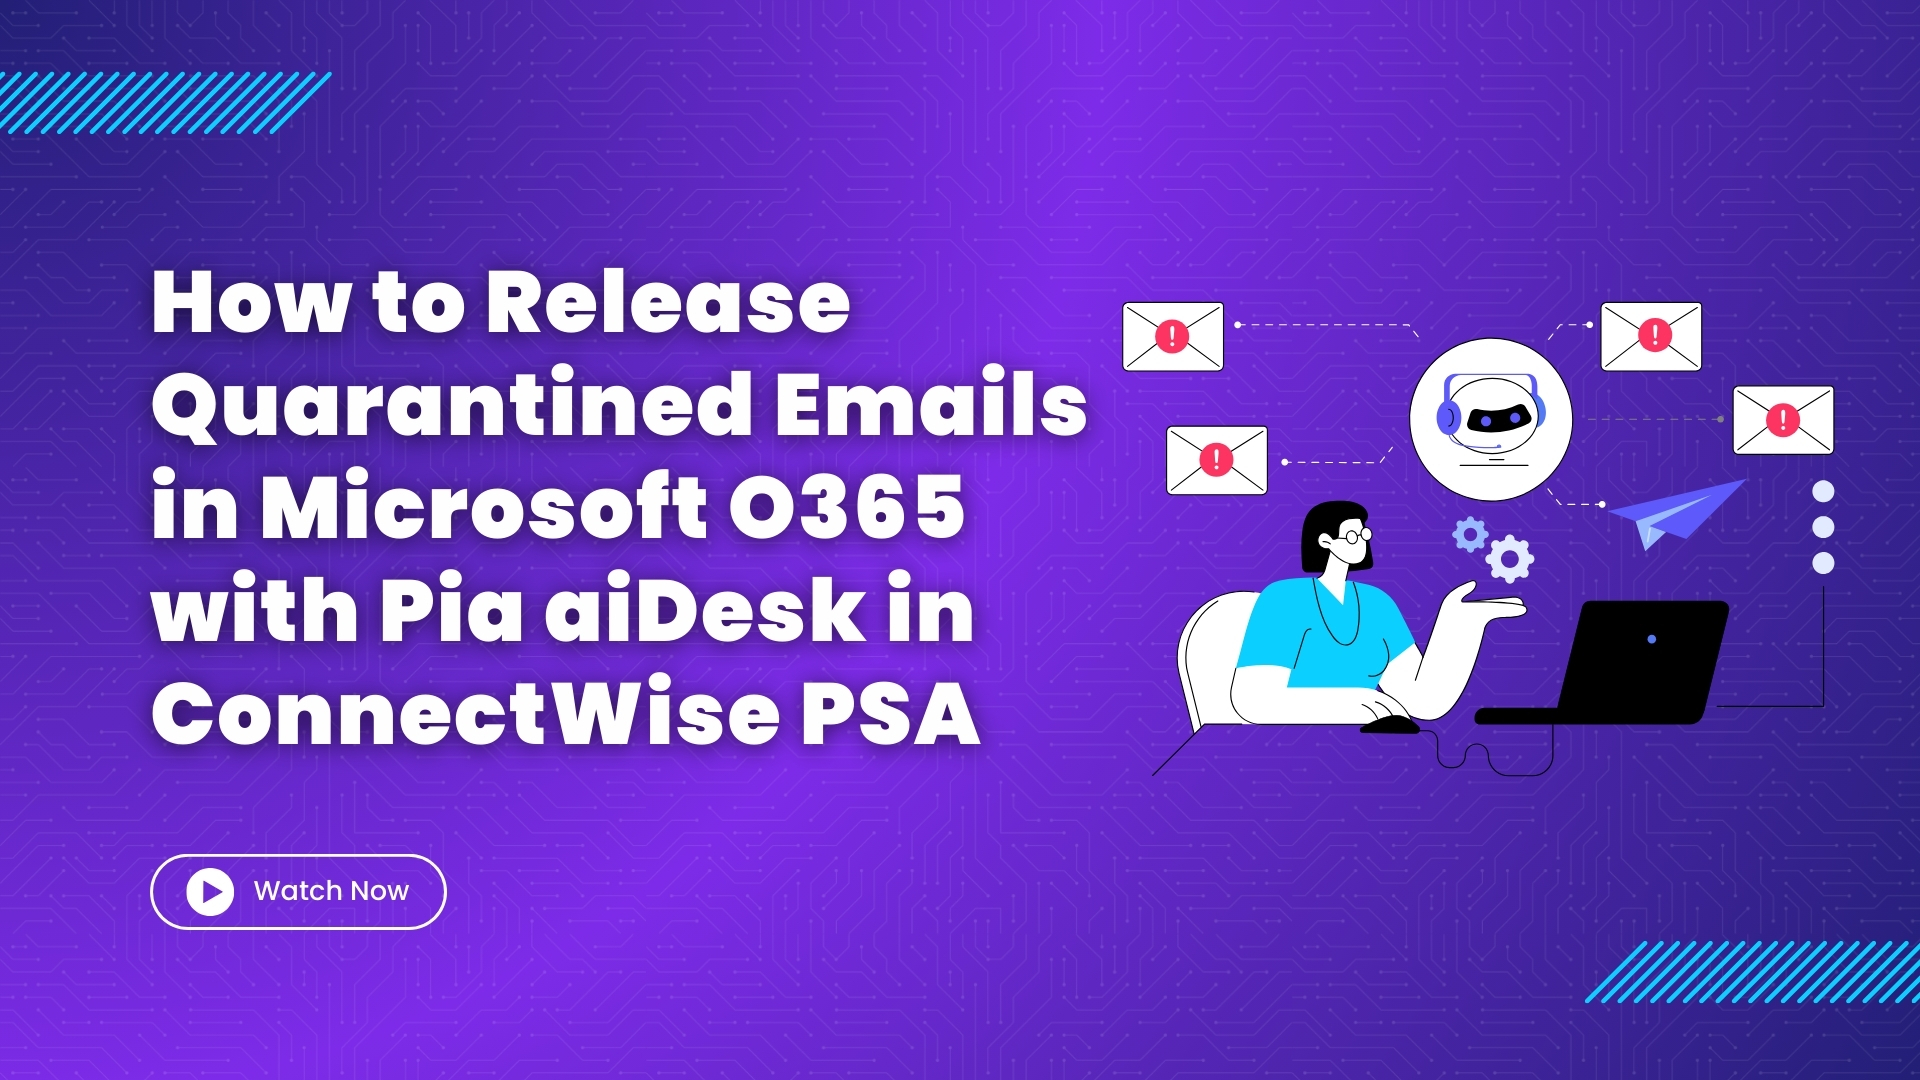 How to Release Quarantined Emails in MS O365 with Pia aiDesk in ConnectWise